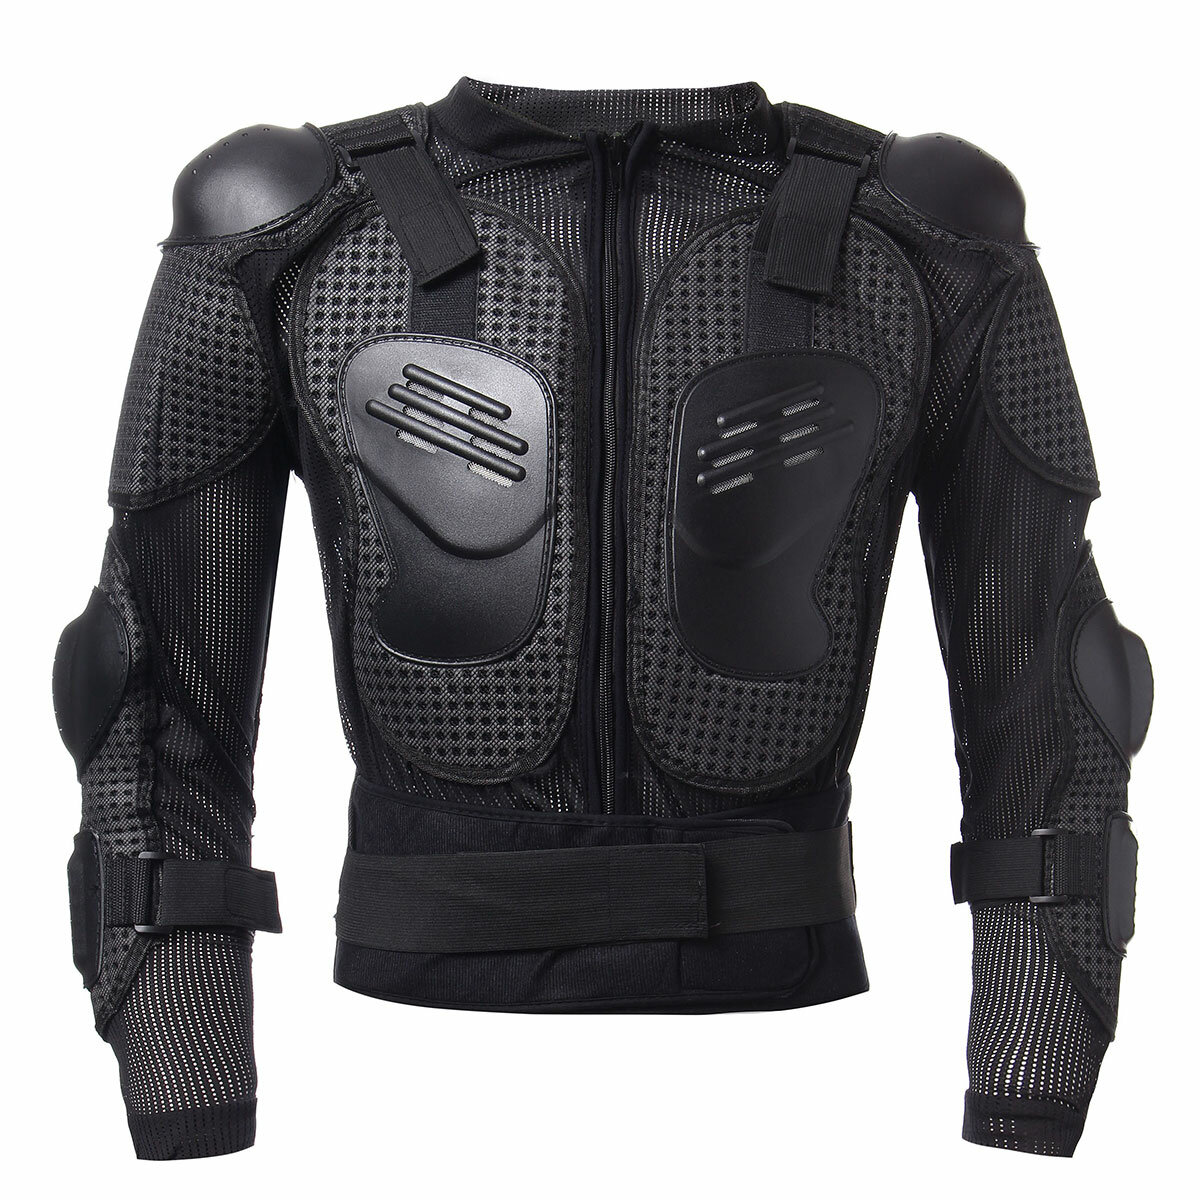 

Motorcycle Bike Full Body Armor Gear Chest Shoulder Motocross Racing Protective Jacket